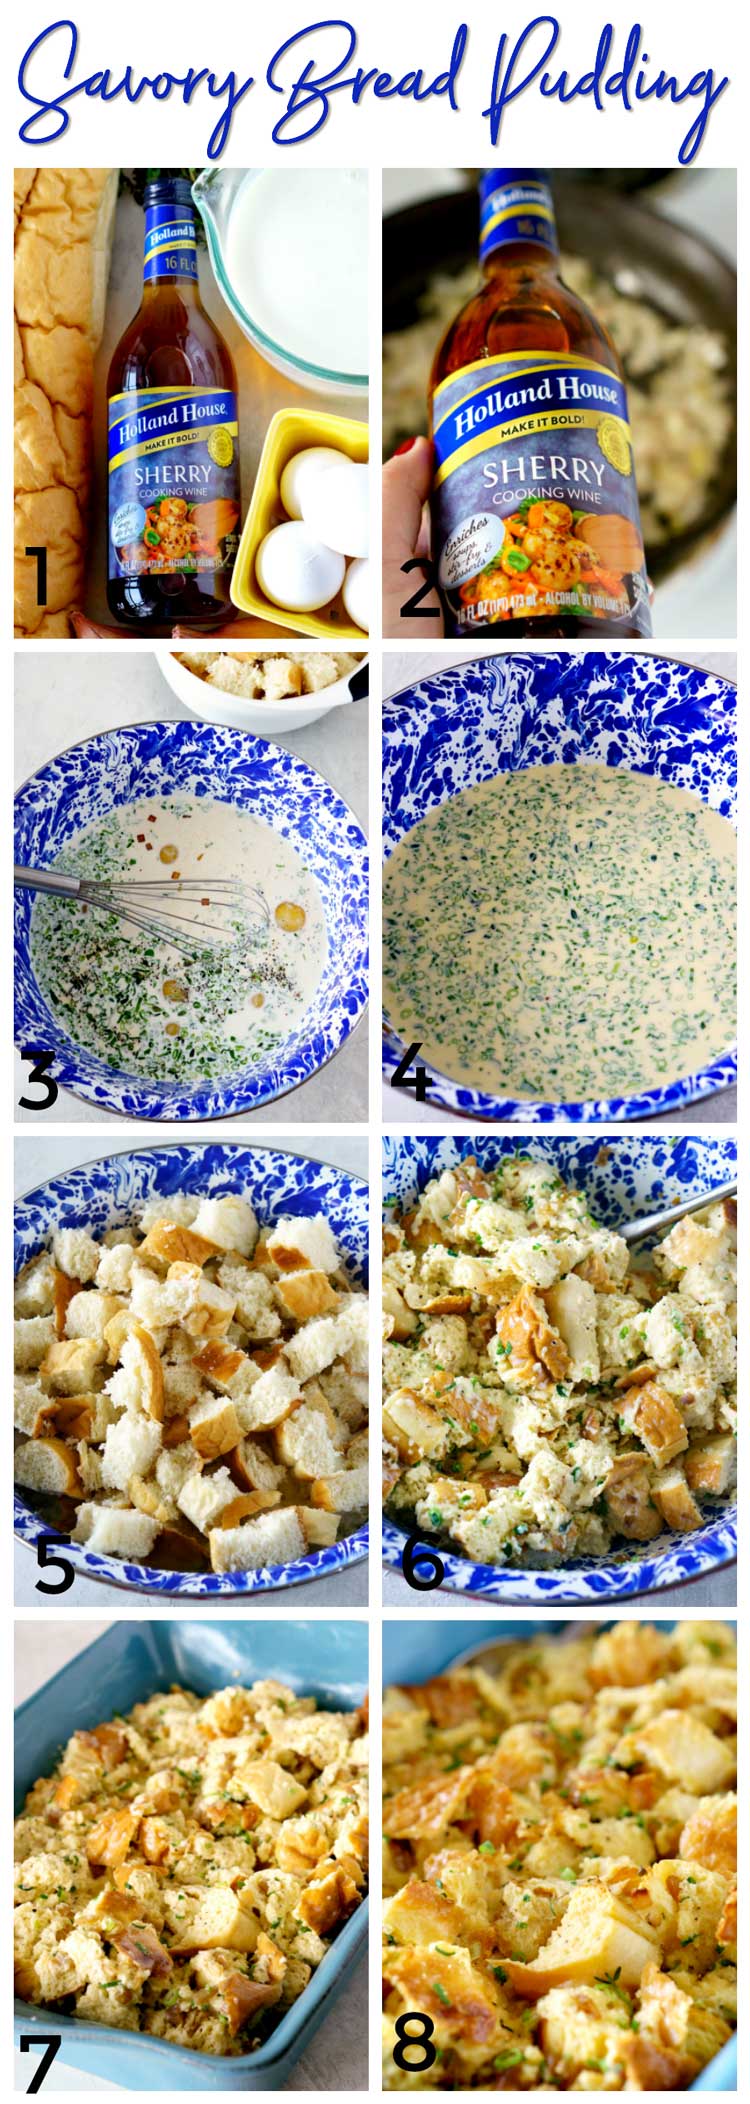 Step-by-Step How to Make Savory Bread Pudding